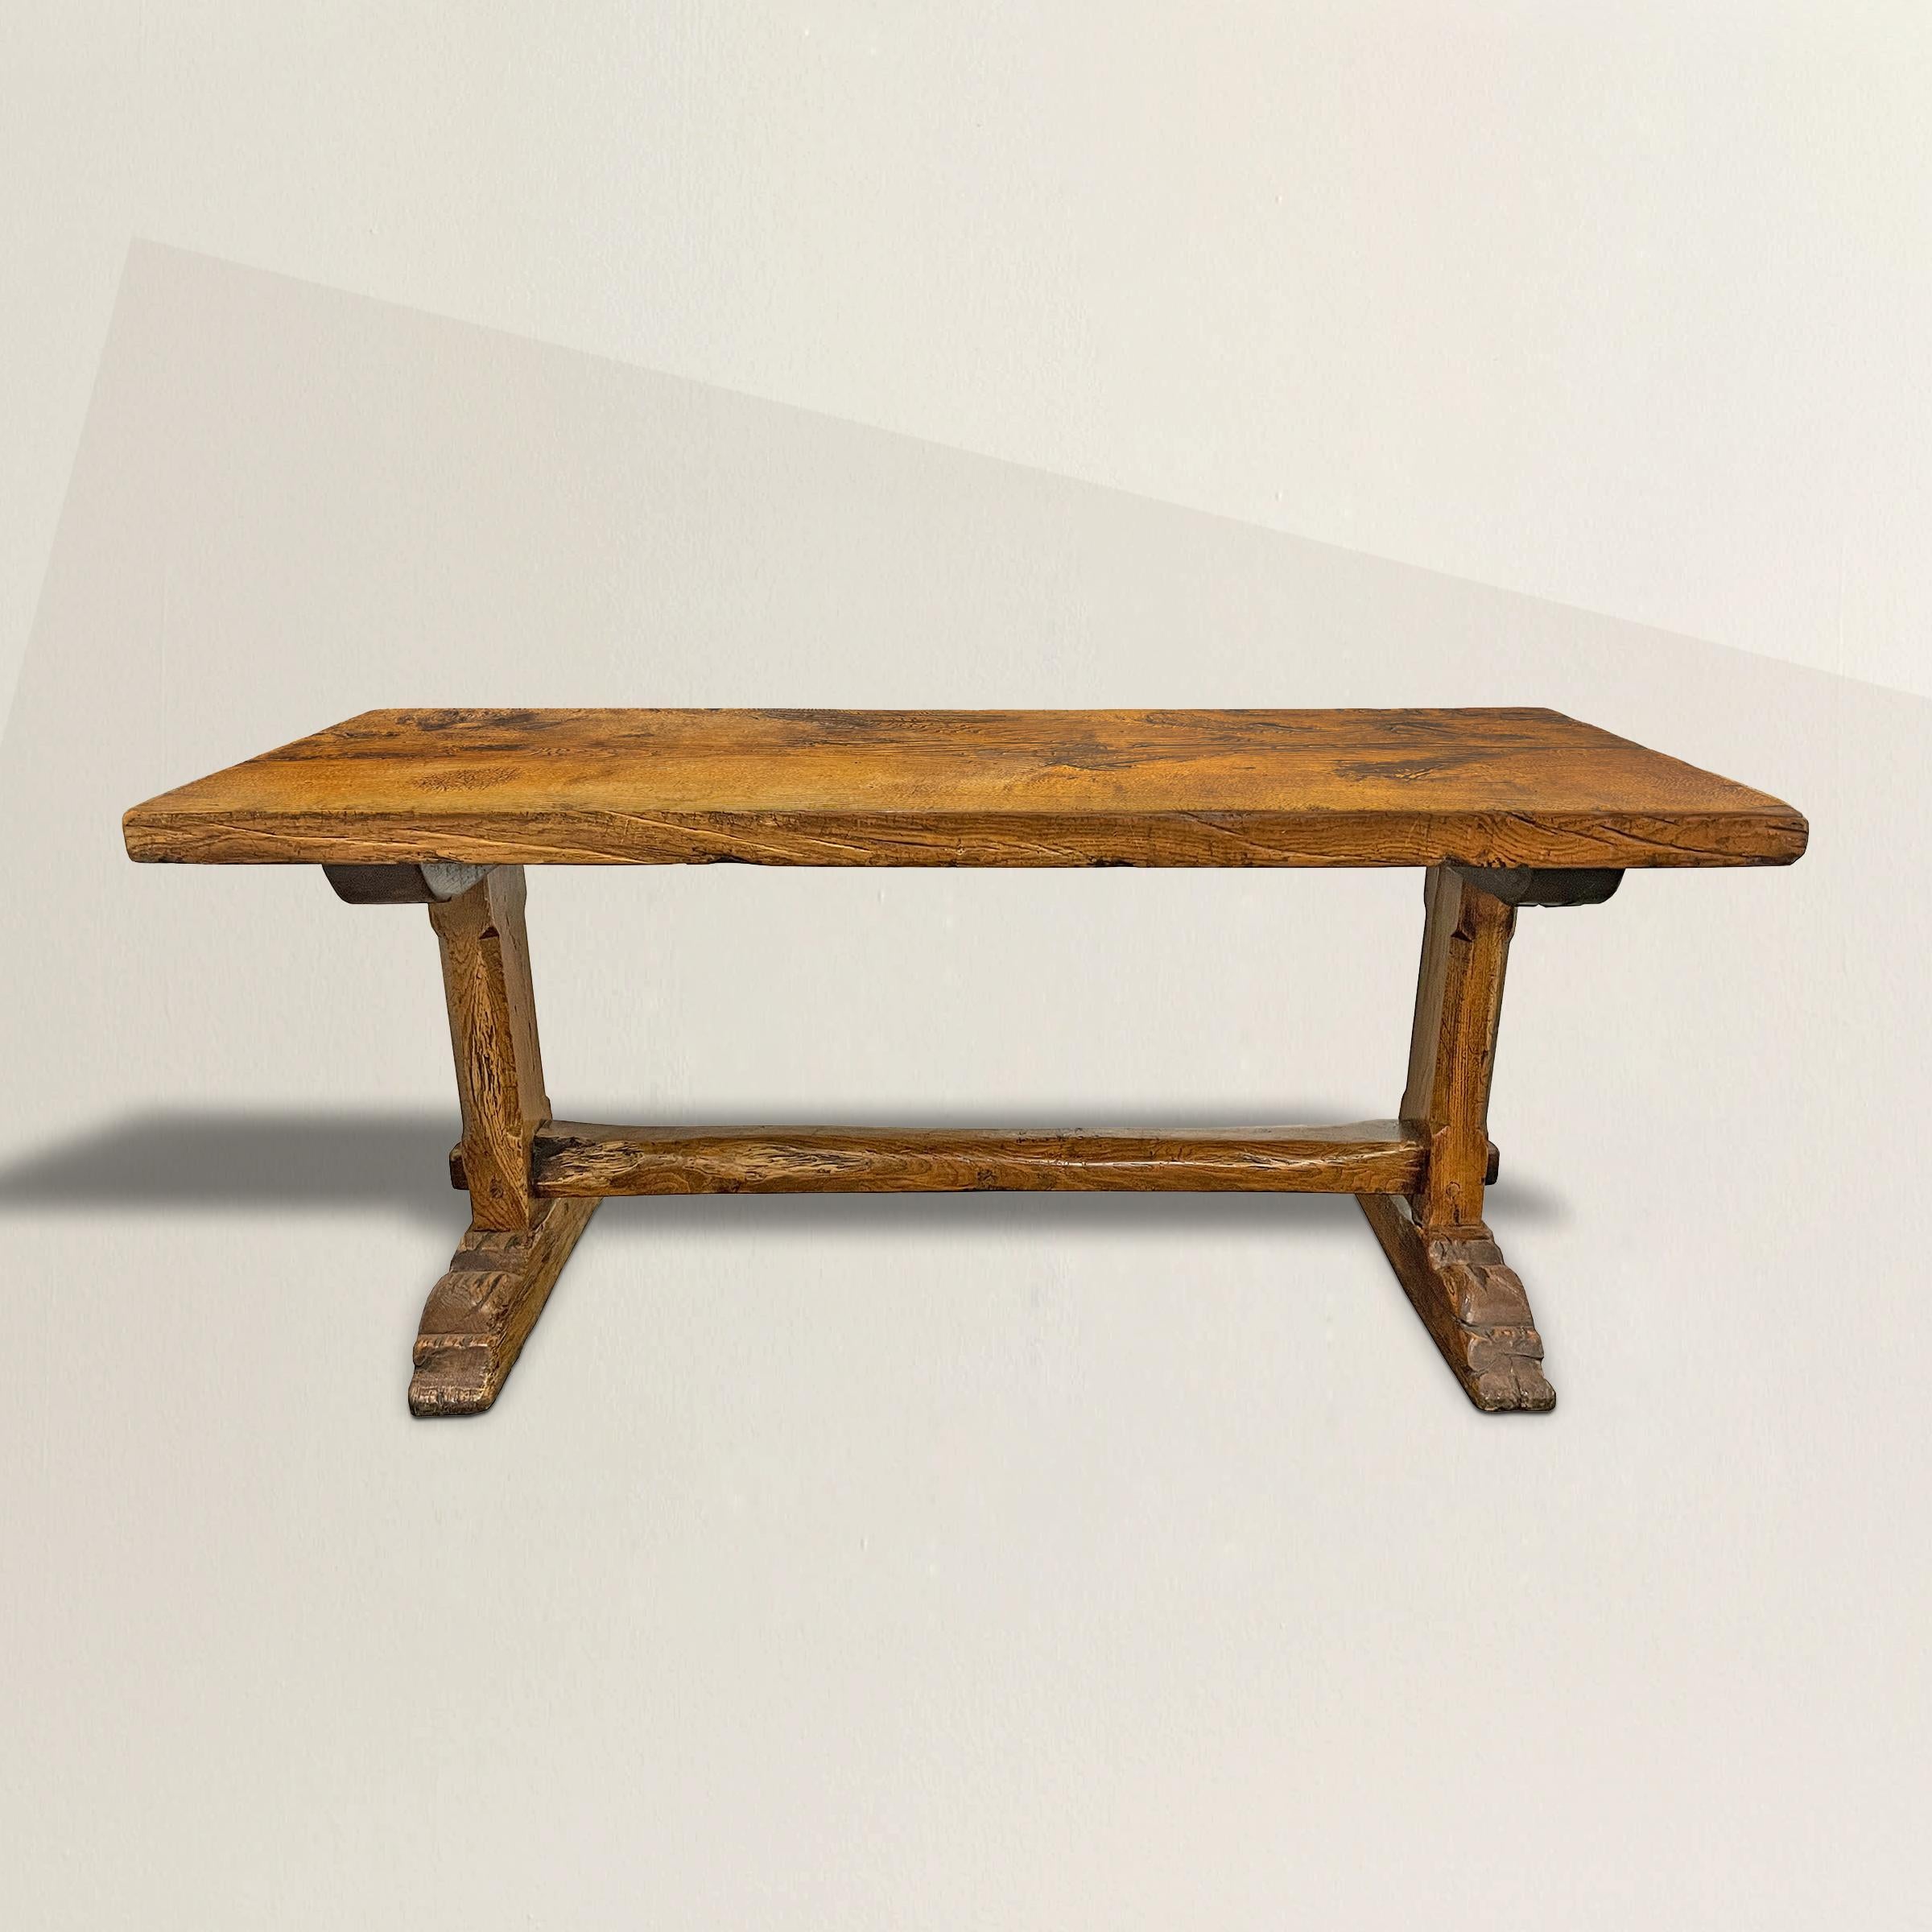 The best early 18th century French oak trestle table with a three-inch thick hand-hewn single-plank top resting on a hand-carved trestle base with chamfered legs and well-worn feet. The finish is the most beautiful we've seen in a long time, with a